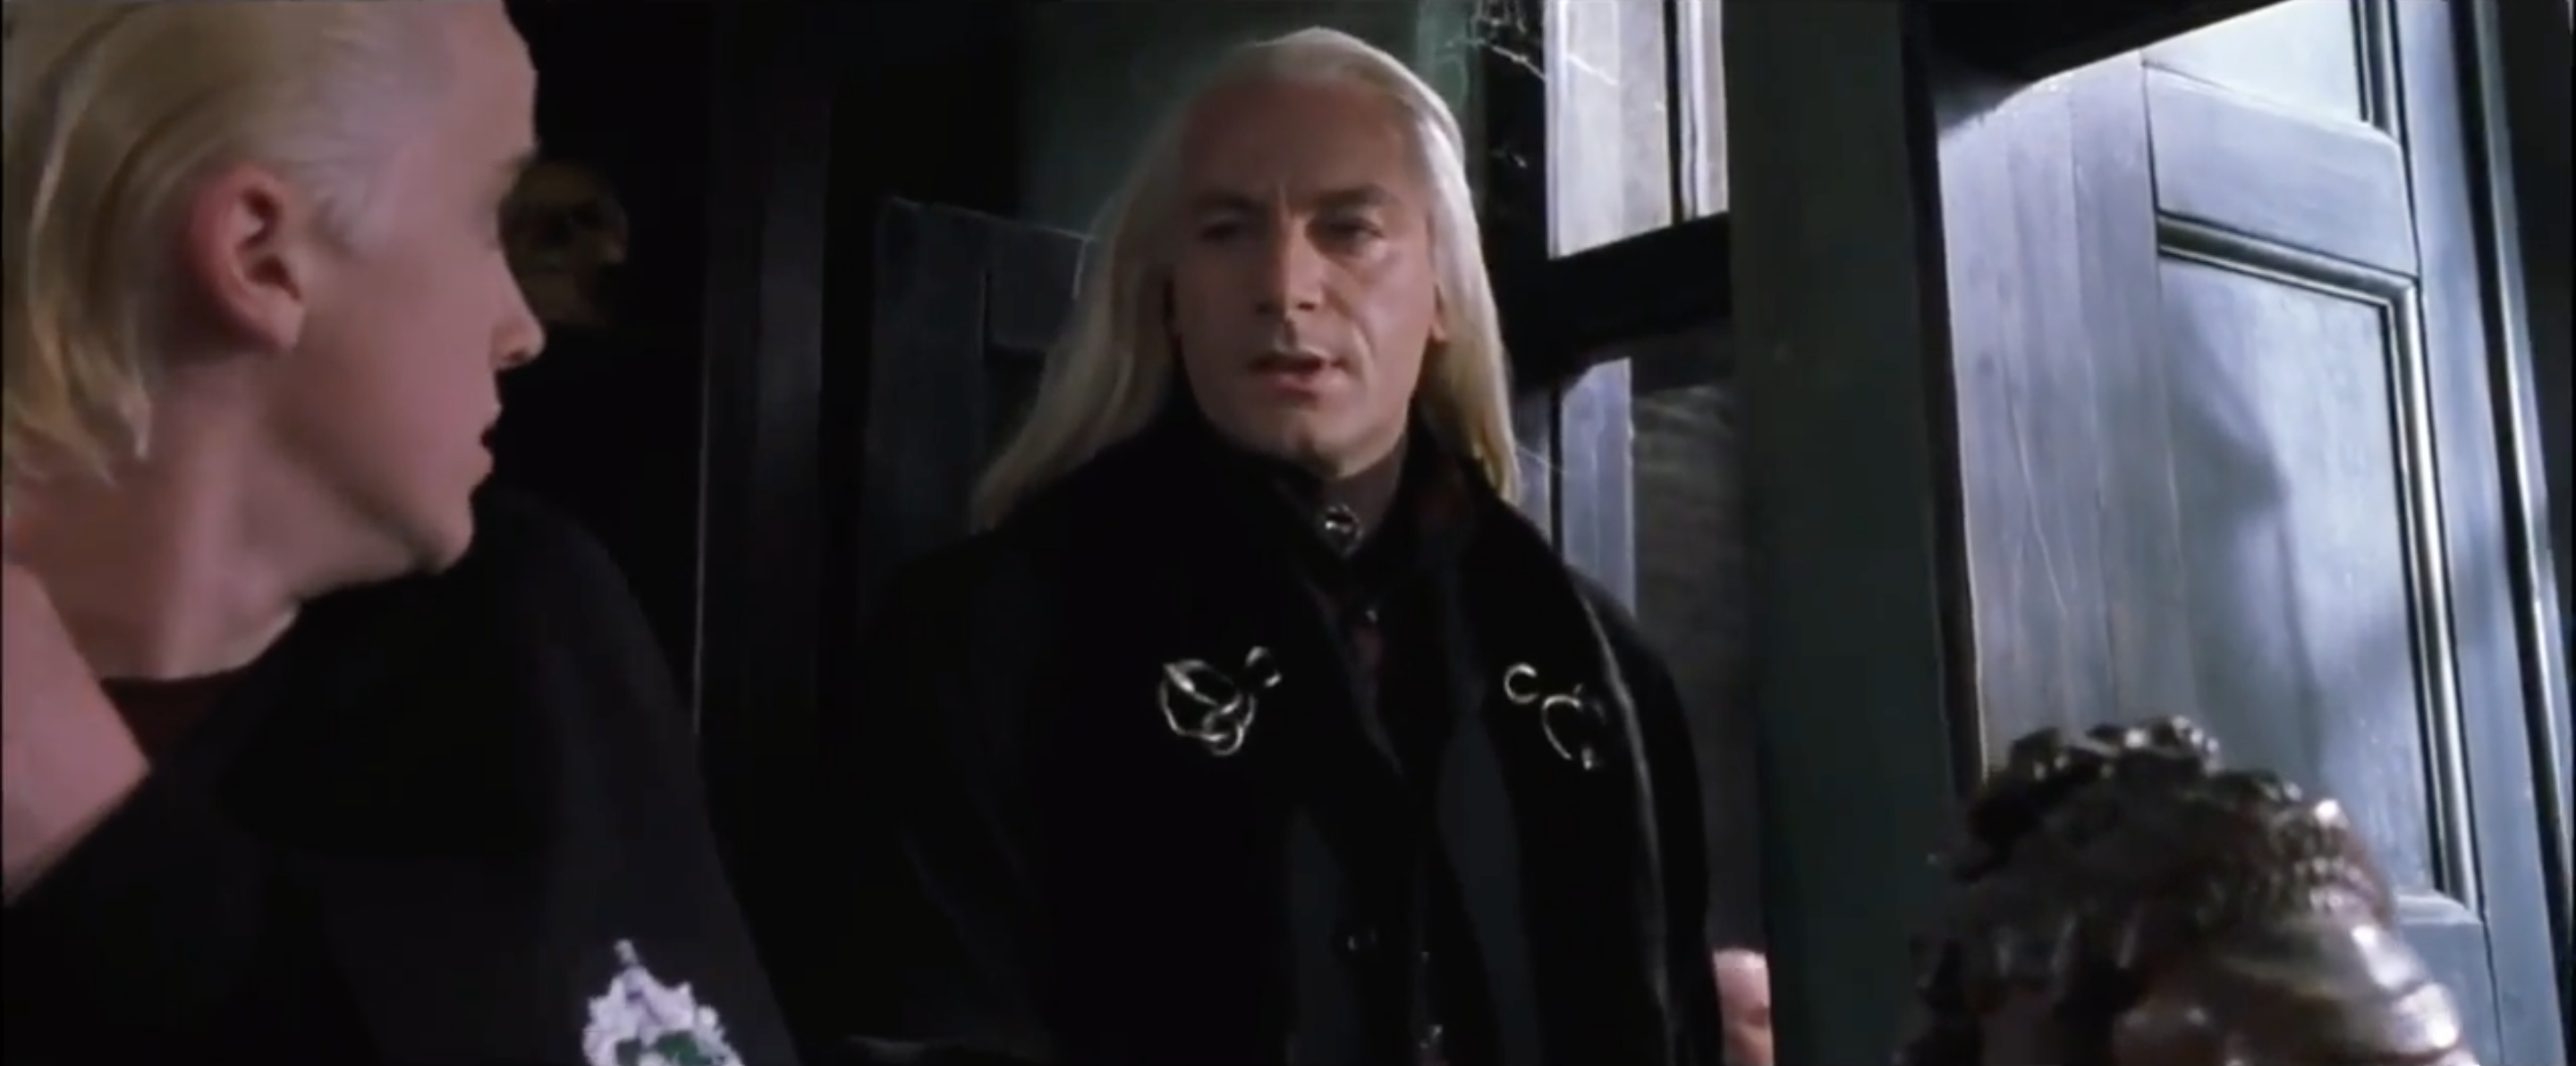 Lucius speaking to a nervous Malfoy